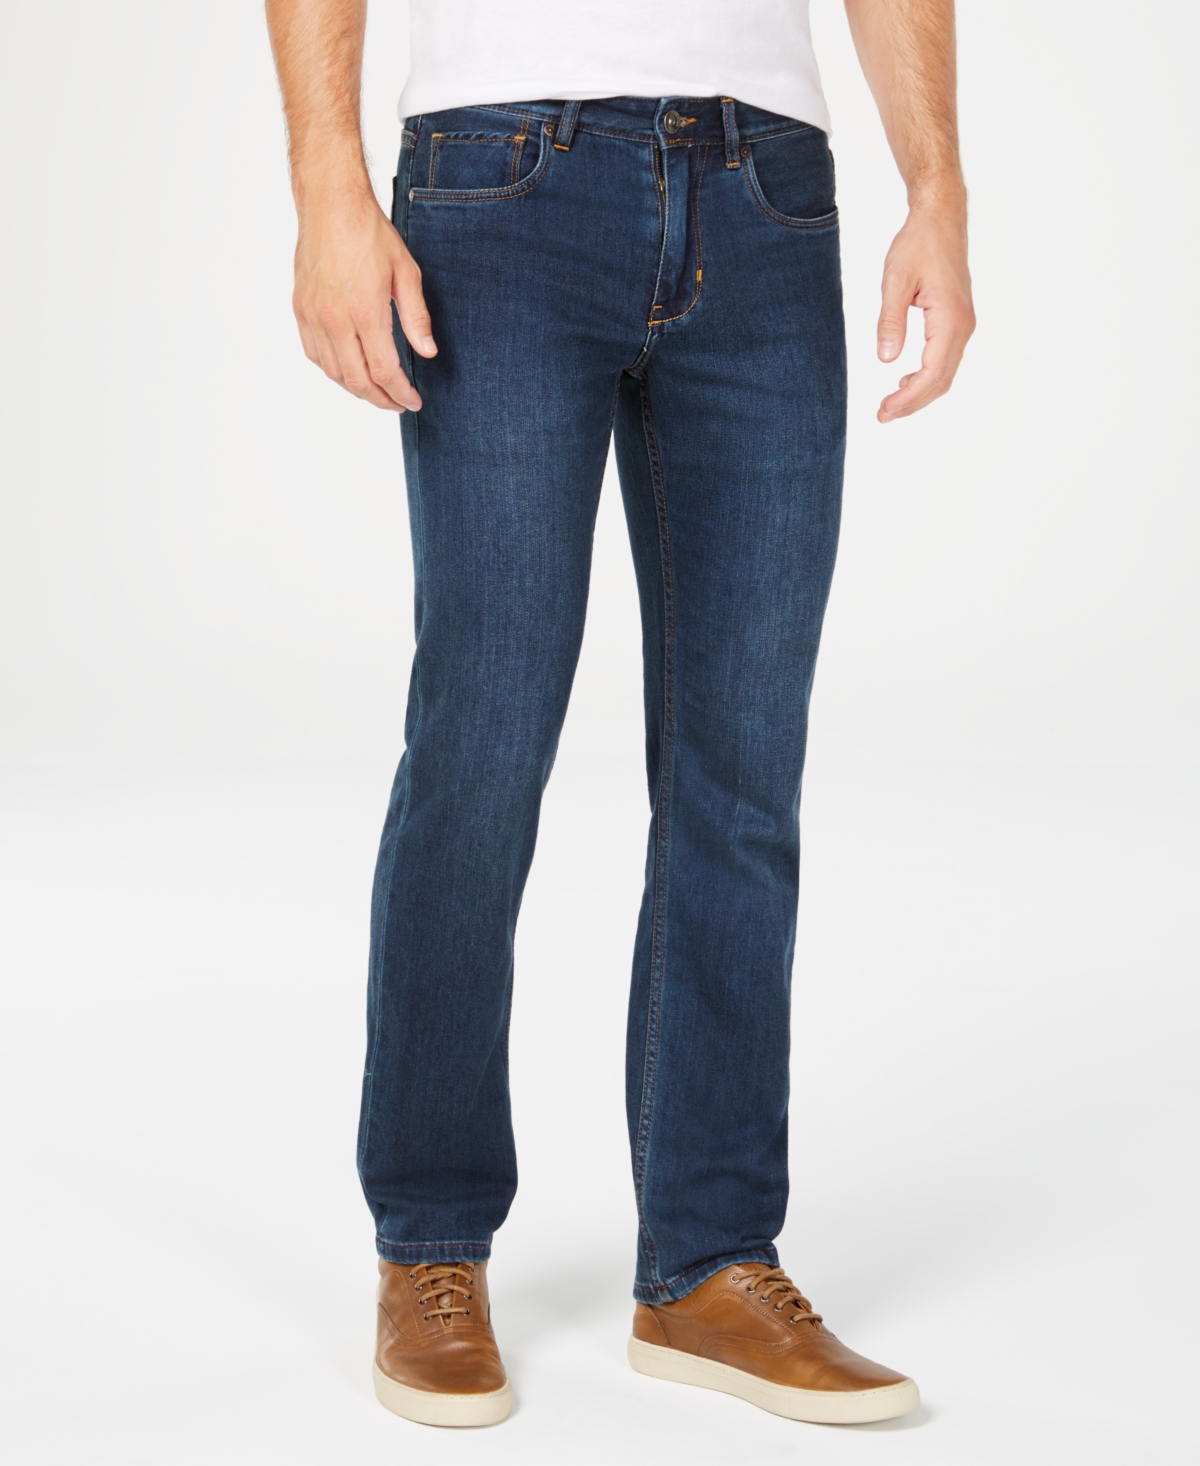 UPC 719260342545 product image for Tommy Bahama Men's Antigua Cove Authentic Fit Jeans | upcitemdb.com